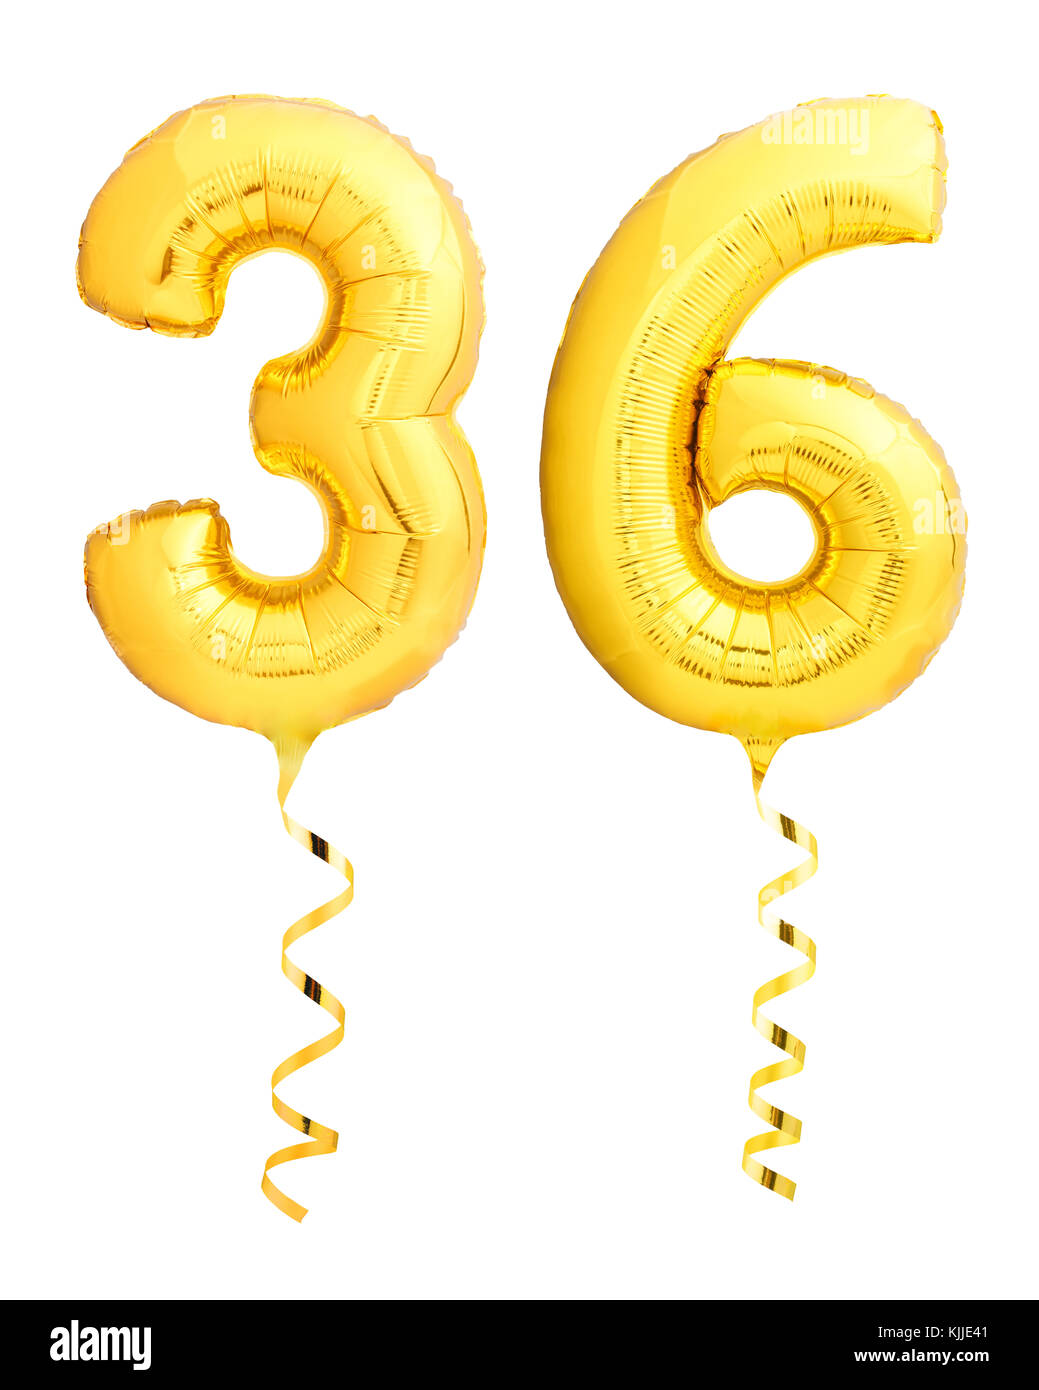 Golden number thirty six 36 made of inflatable balloon Stock Photo - Alamy